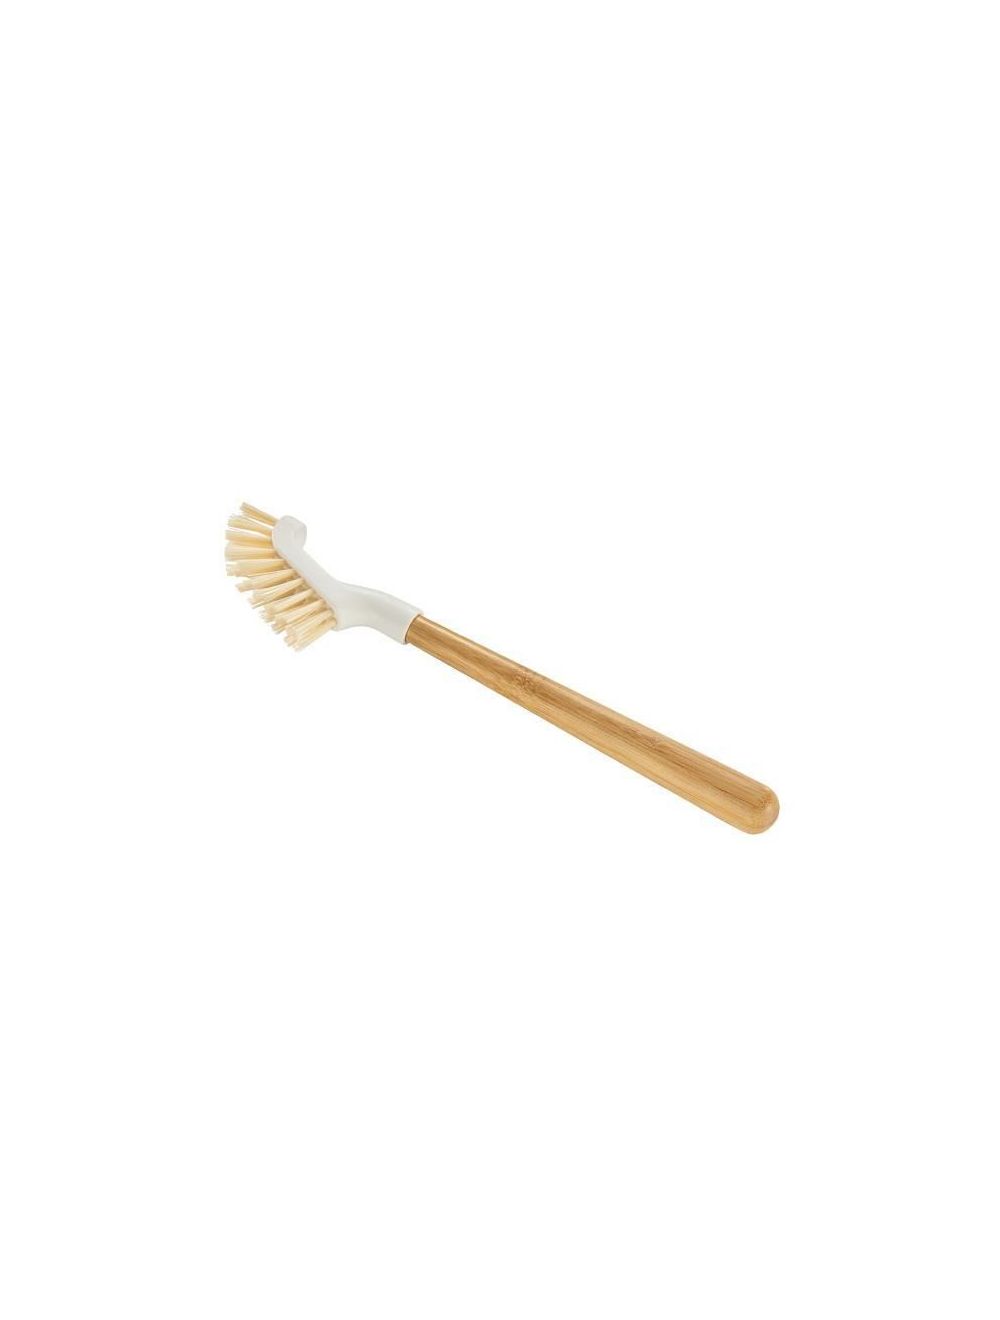 Tescoma Cleankit Bamboo Narrow Brush for Dishes 28.5 cm